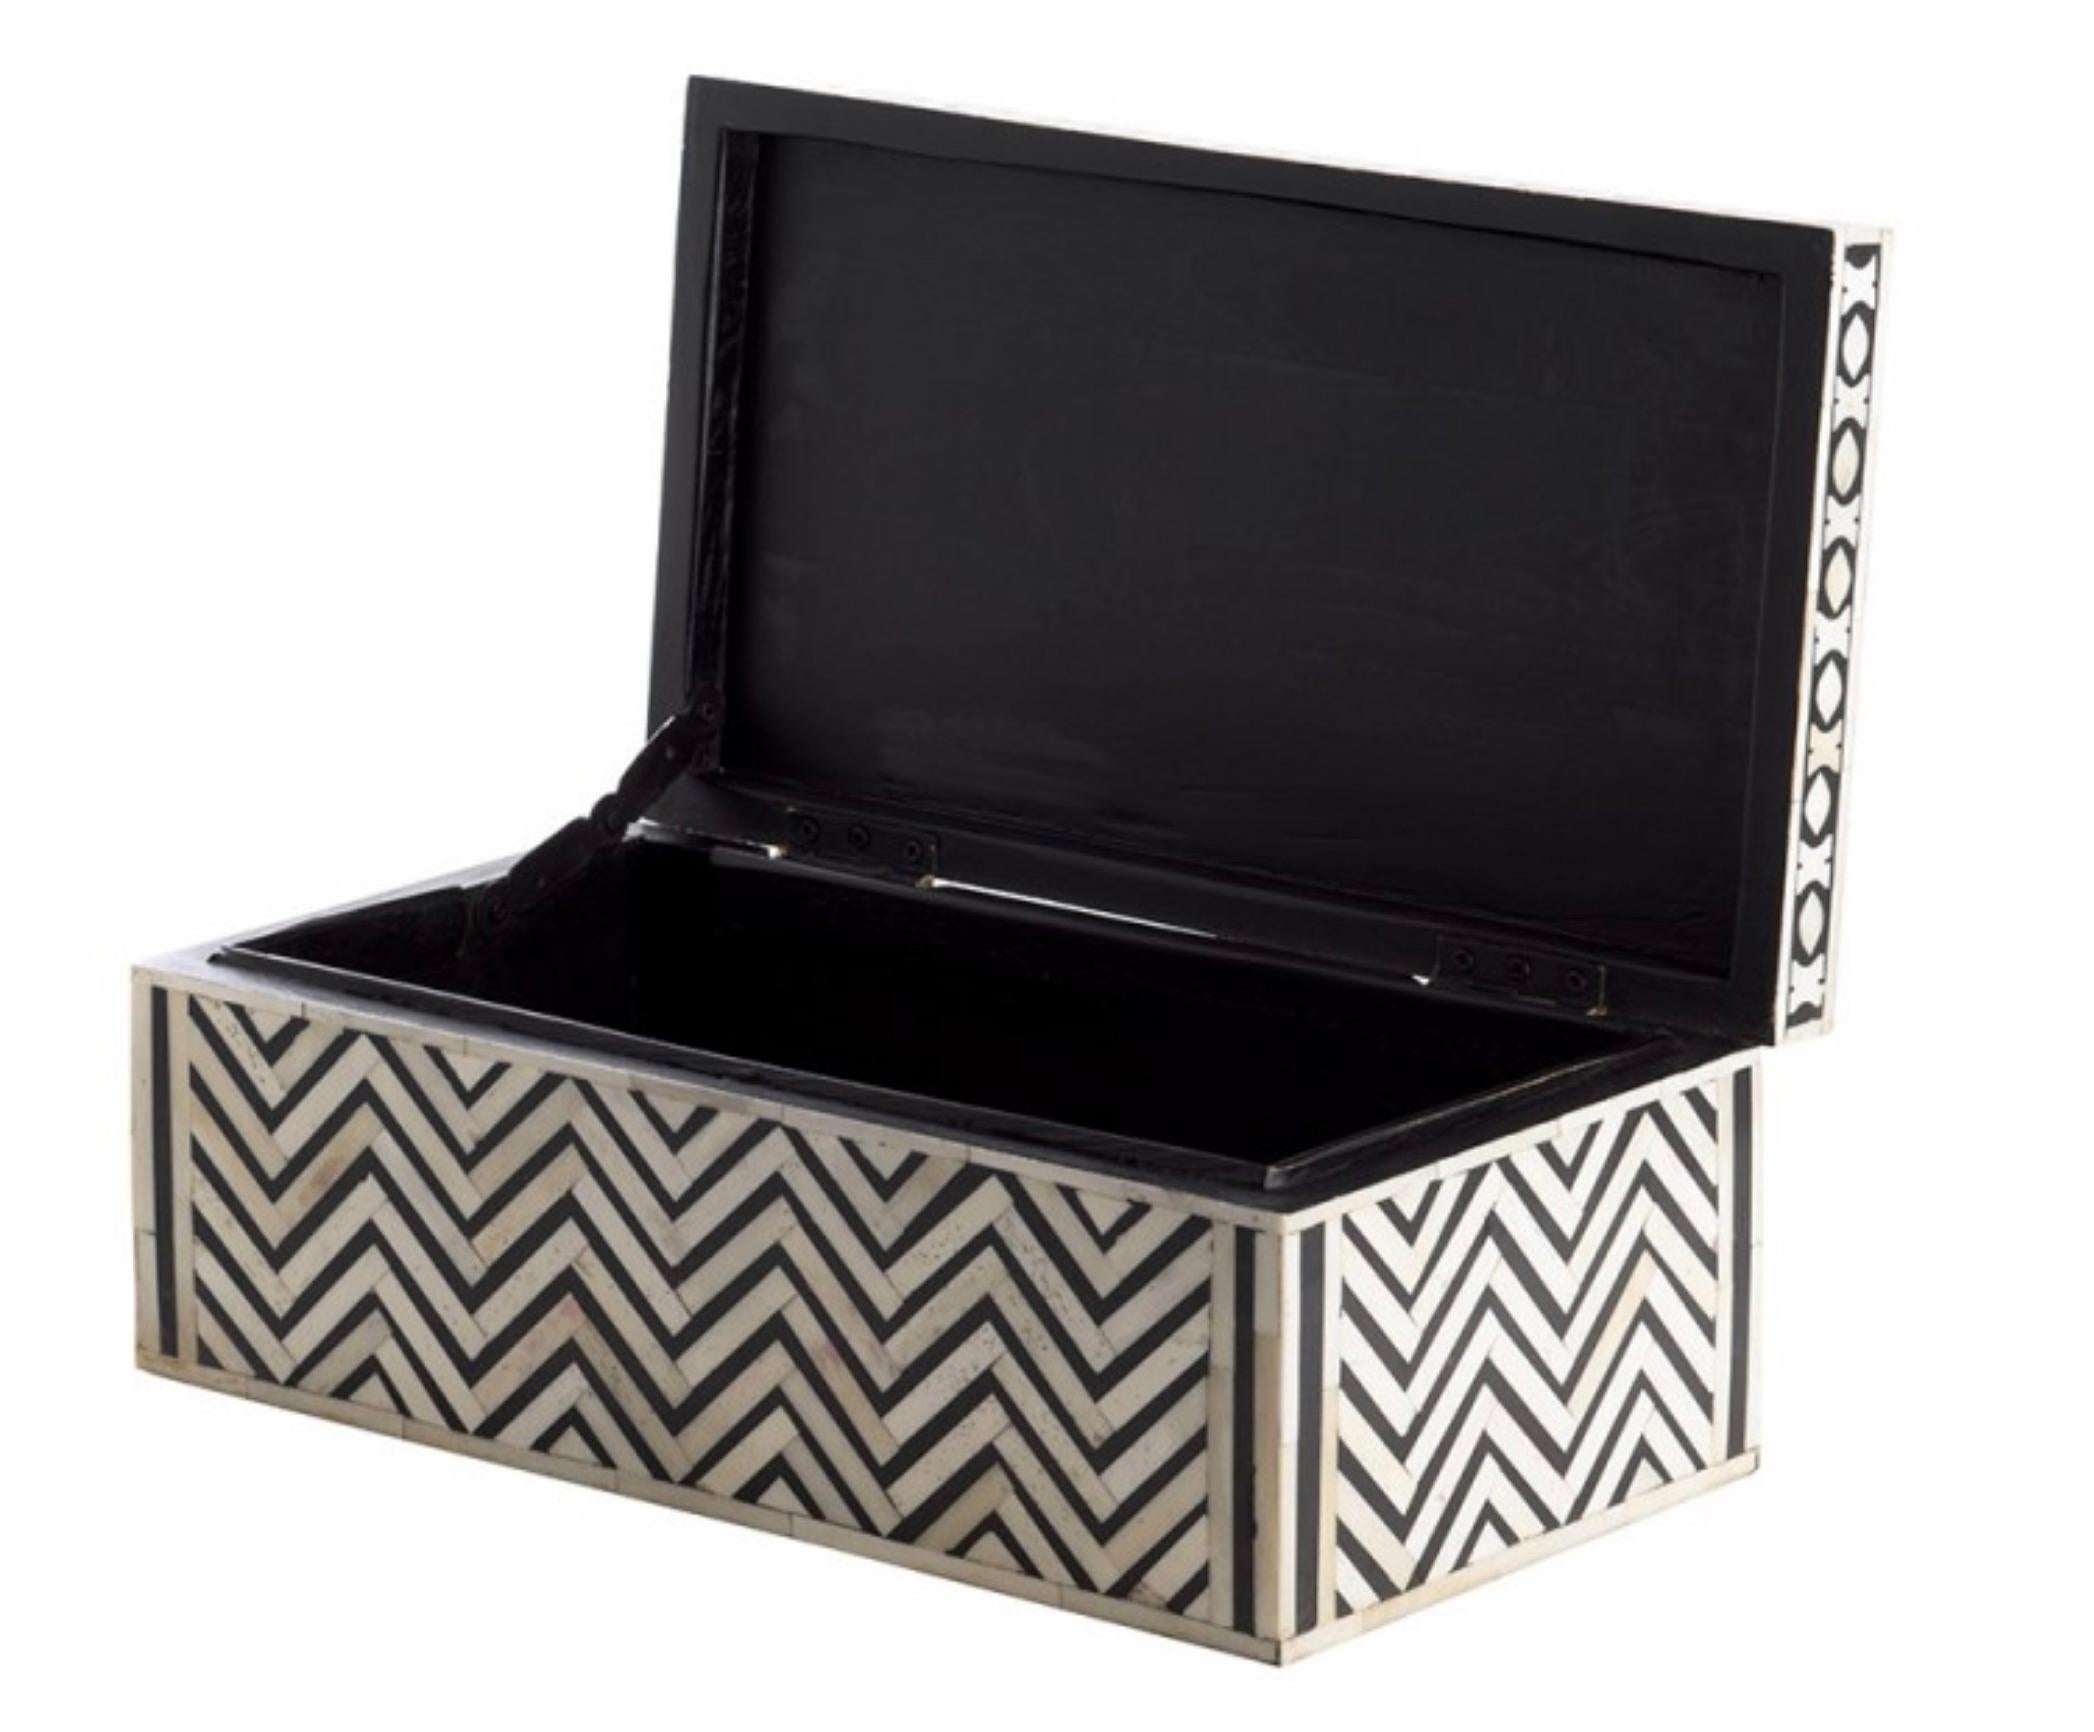 Contemporary Indonesian inlaid black and cream bone zig zag pattern box.
Patterned border on the sides of the lid.
Hinged lid.
ARRIVAL TBD
   